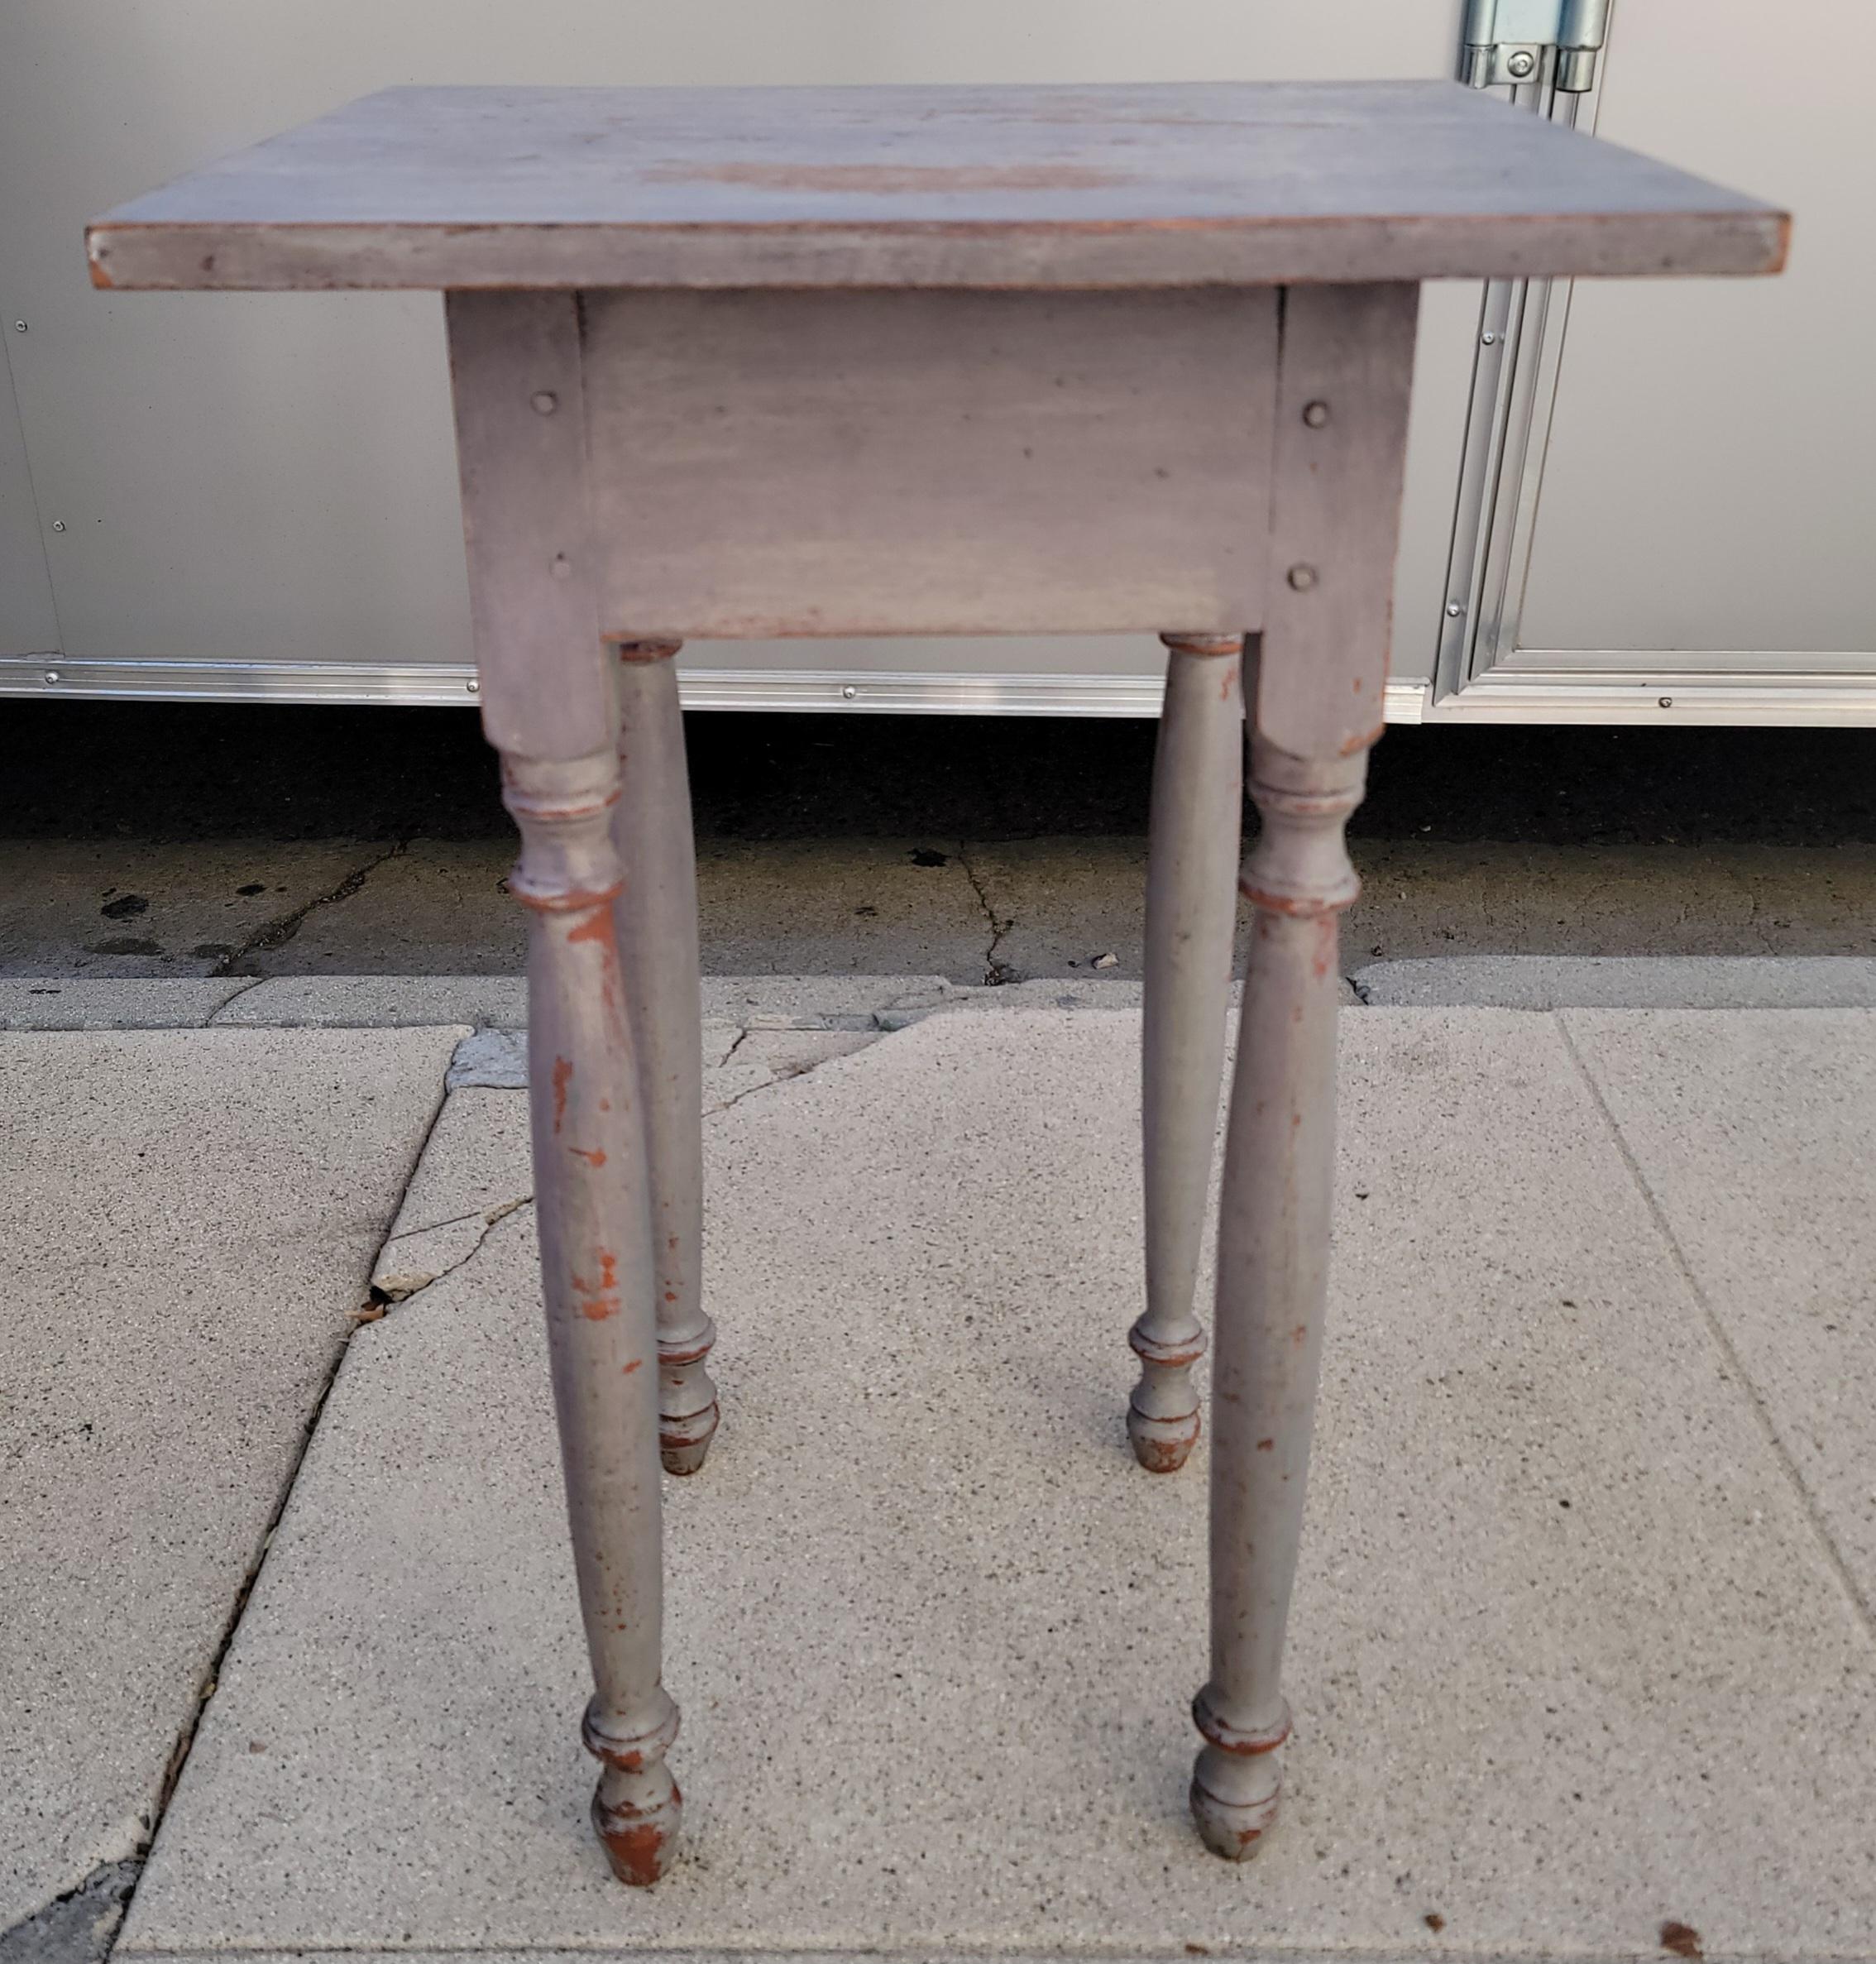 19Thc Original grey / blue painted turned legs night stand or side table in amazing untouched surface.This fine side table is perfect in a living room or bedroom nightstand.The condition is very good and sturdy.